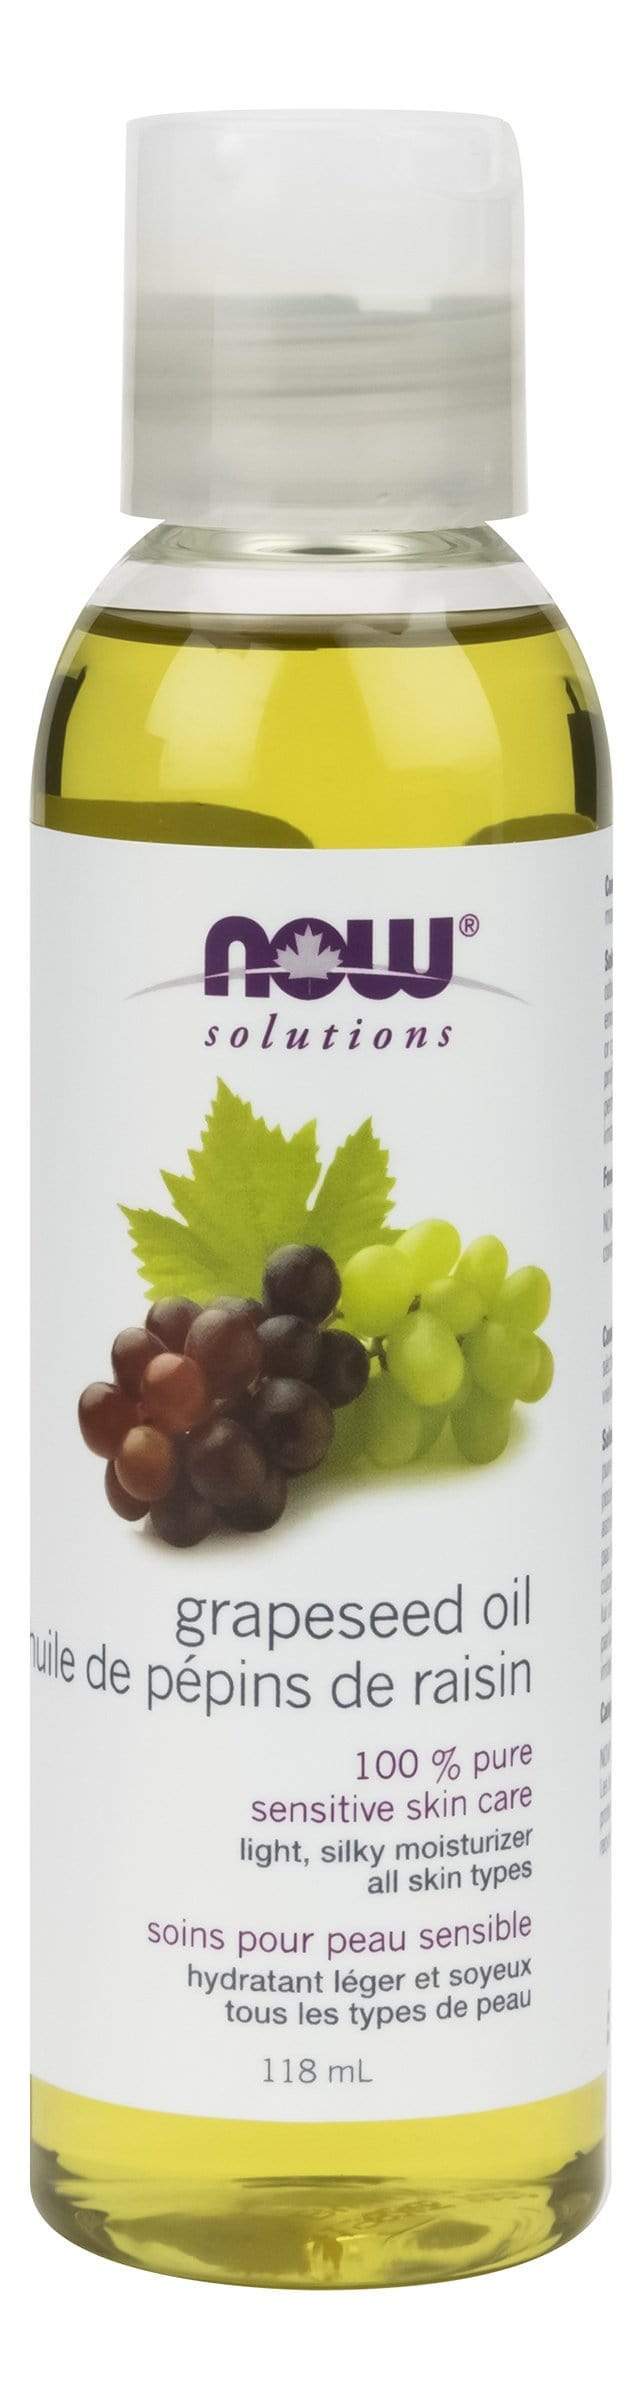 NOW Grapeseed Oil, Pure 118 mL